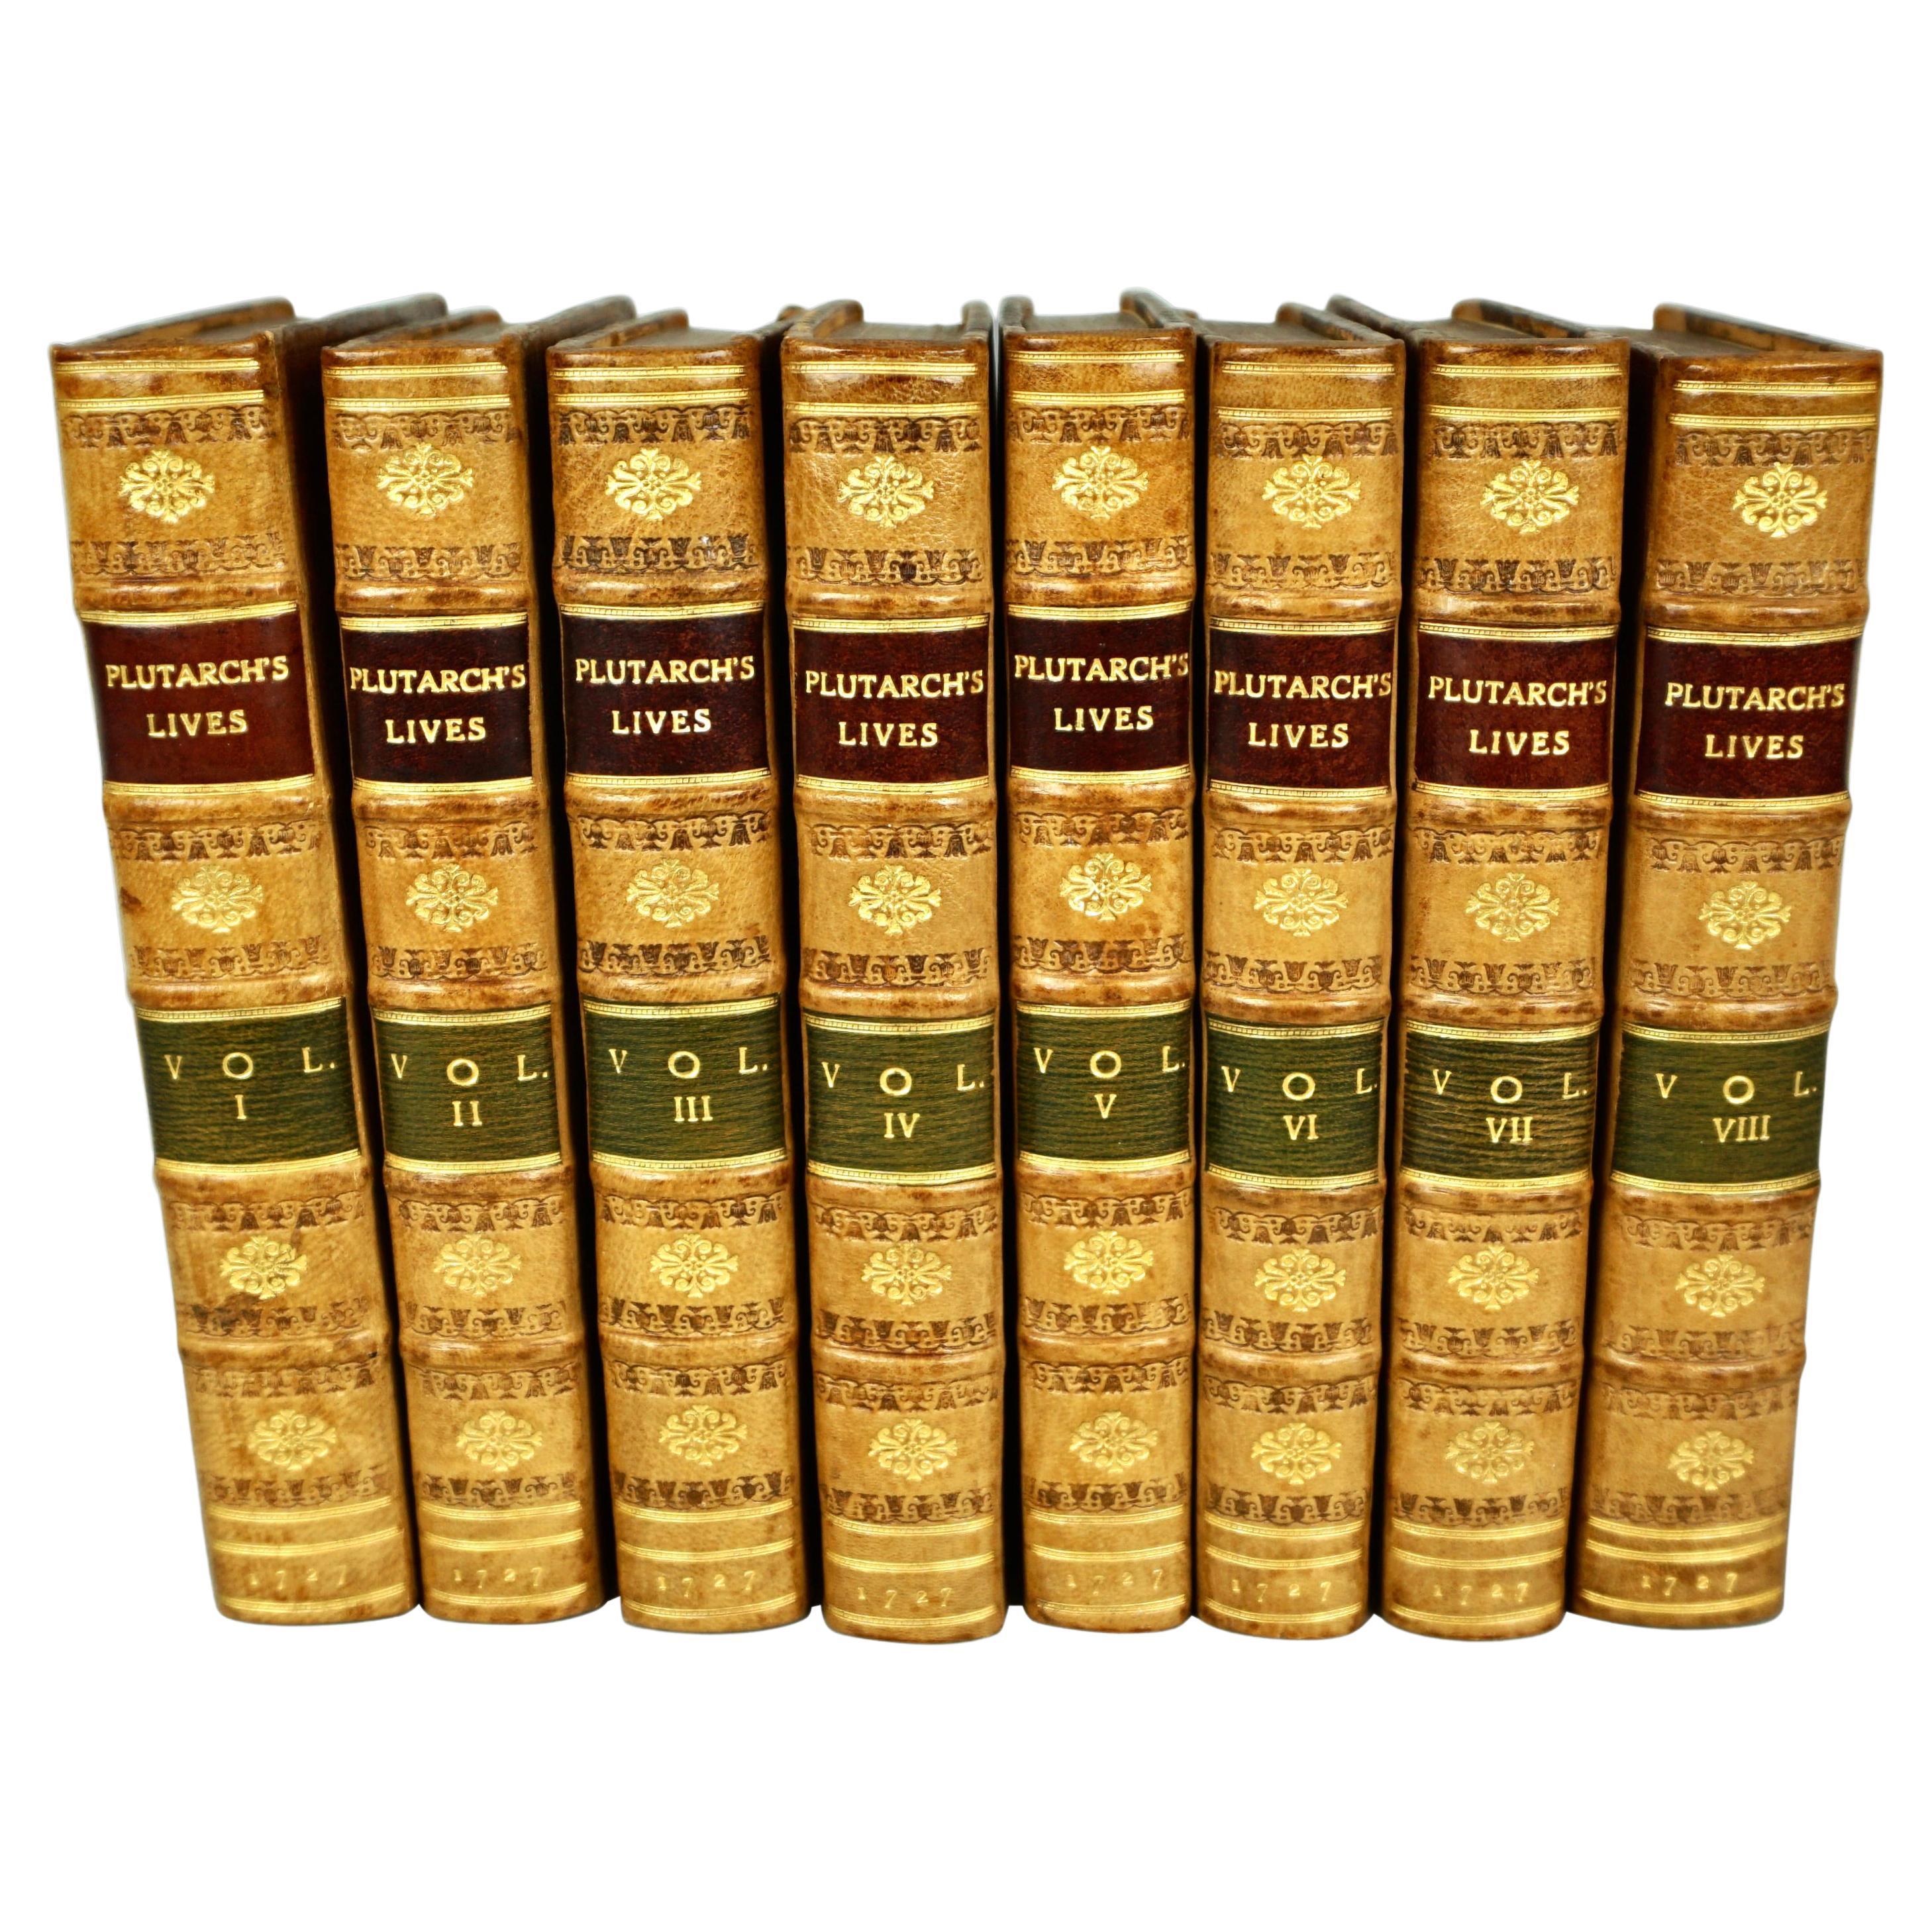 Plutarch's Lives in 8 Leatherbound Volumes Published London, J. Tonson 1727